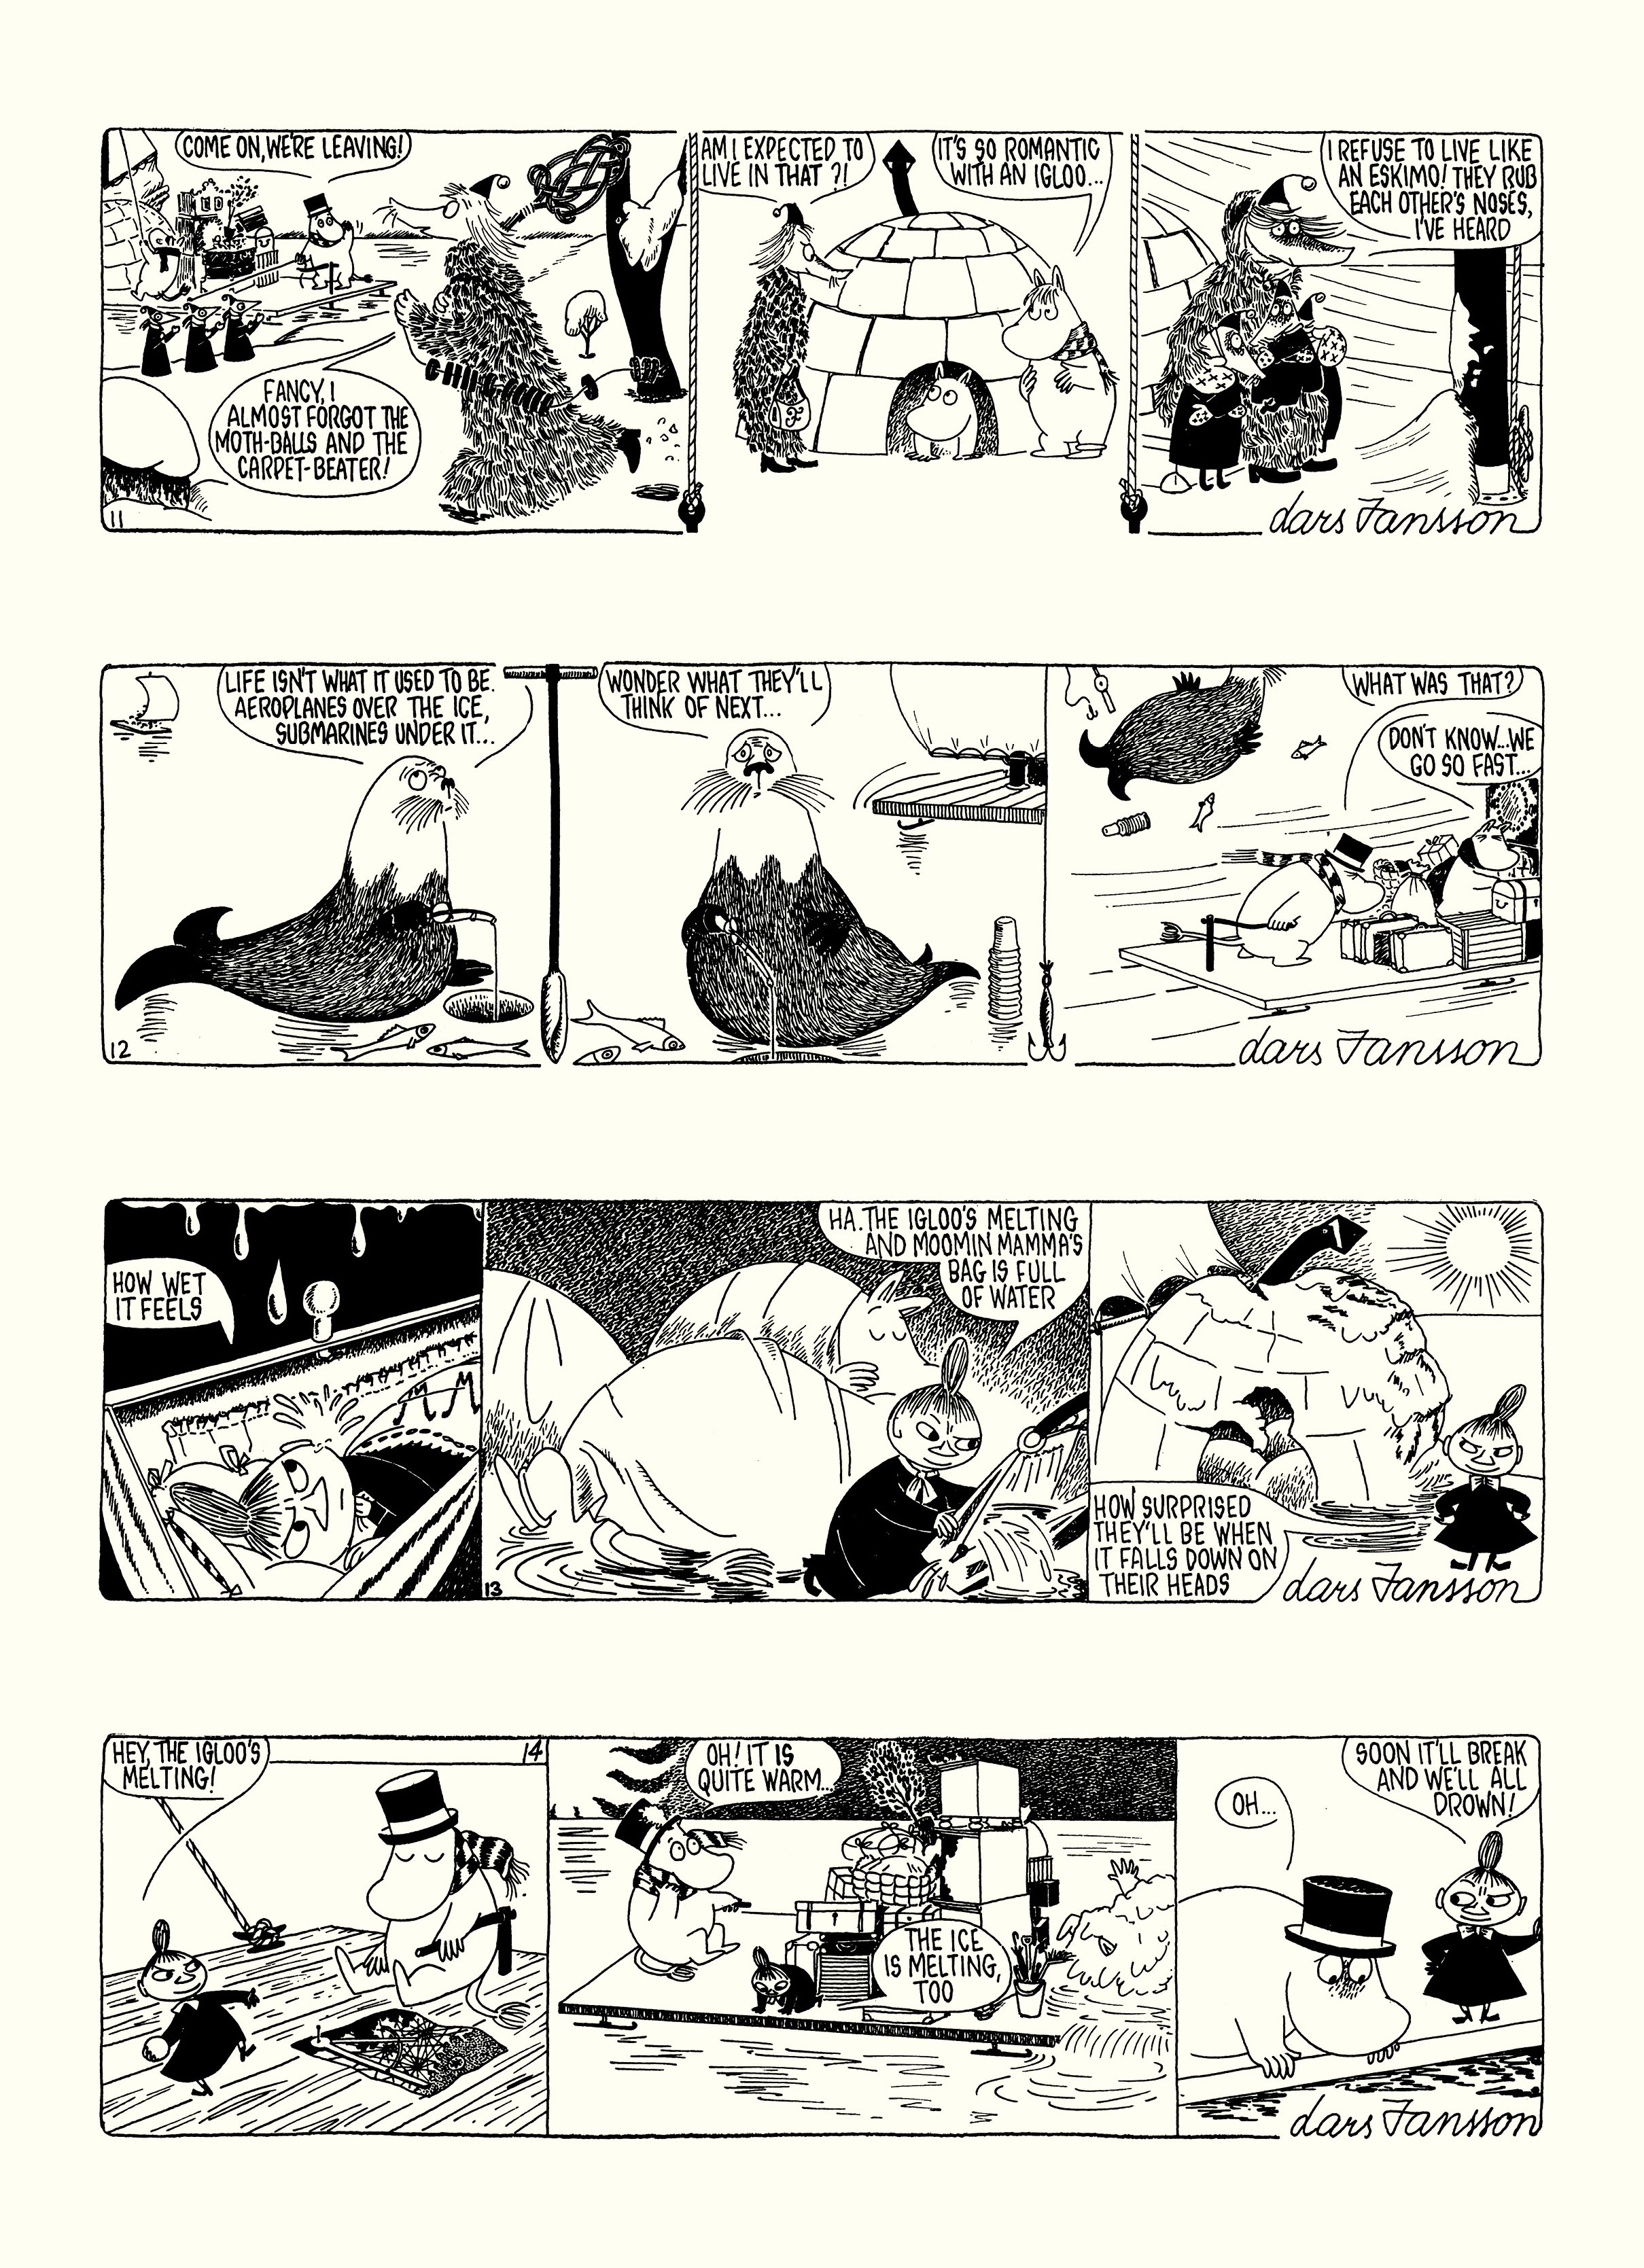 Read online Moomin: The Complete Lars Jansson Comic Strip comic -  Issue # TPB 7 - 9